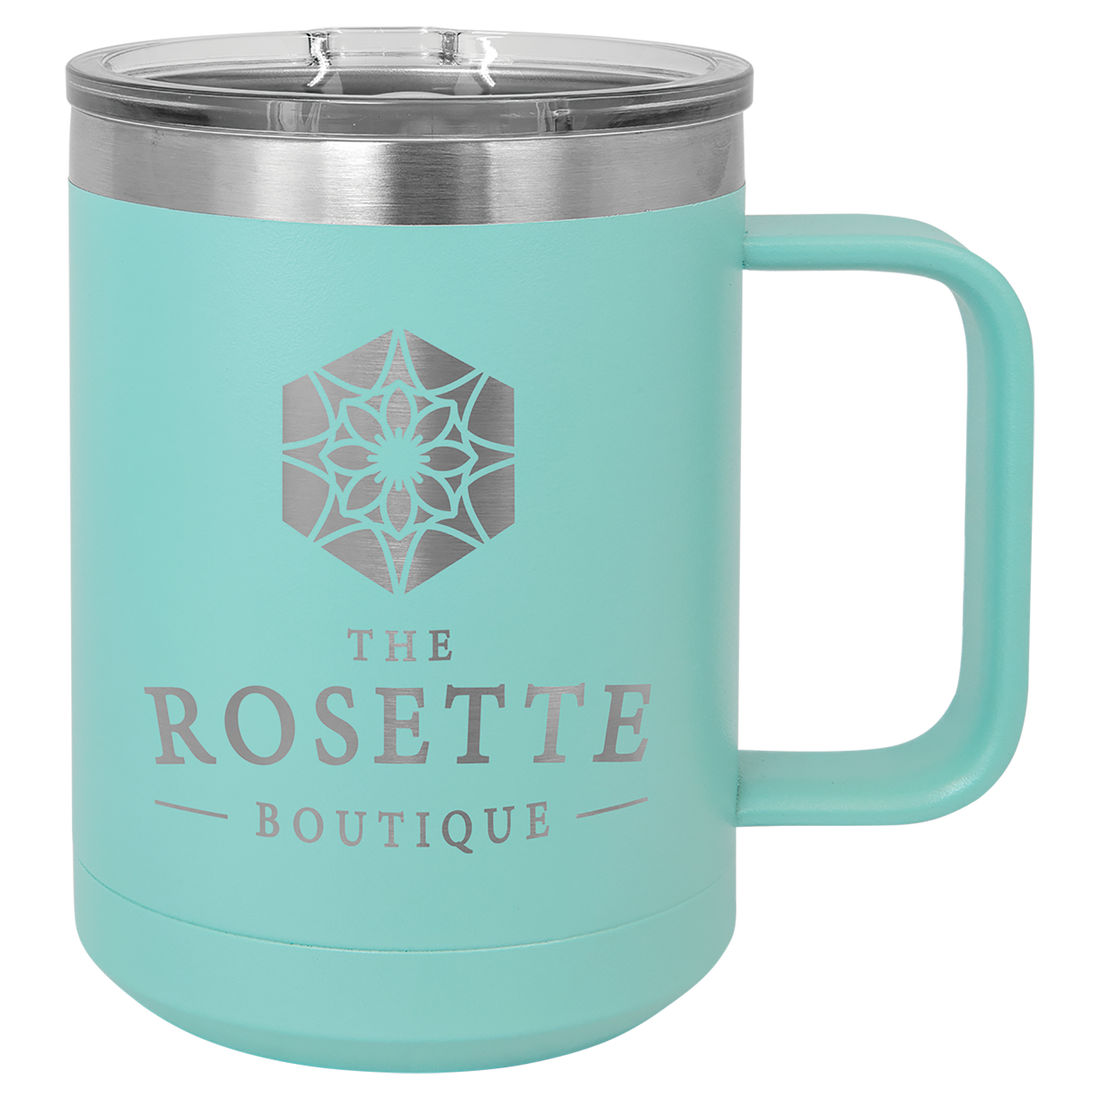 Teal insulated travel mug with logo engraving.